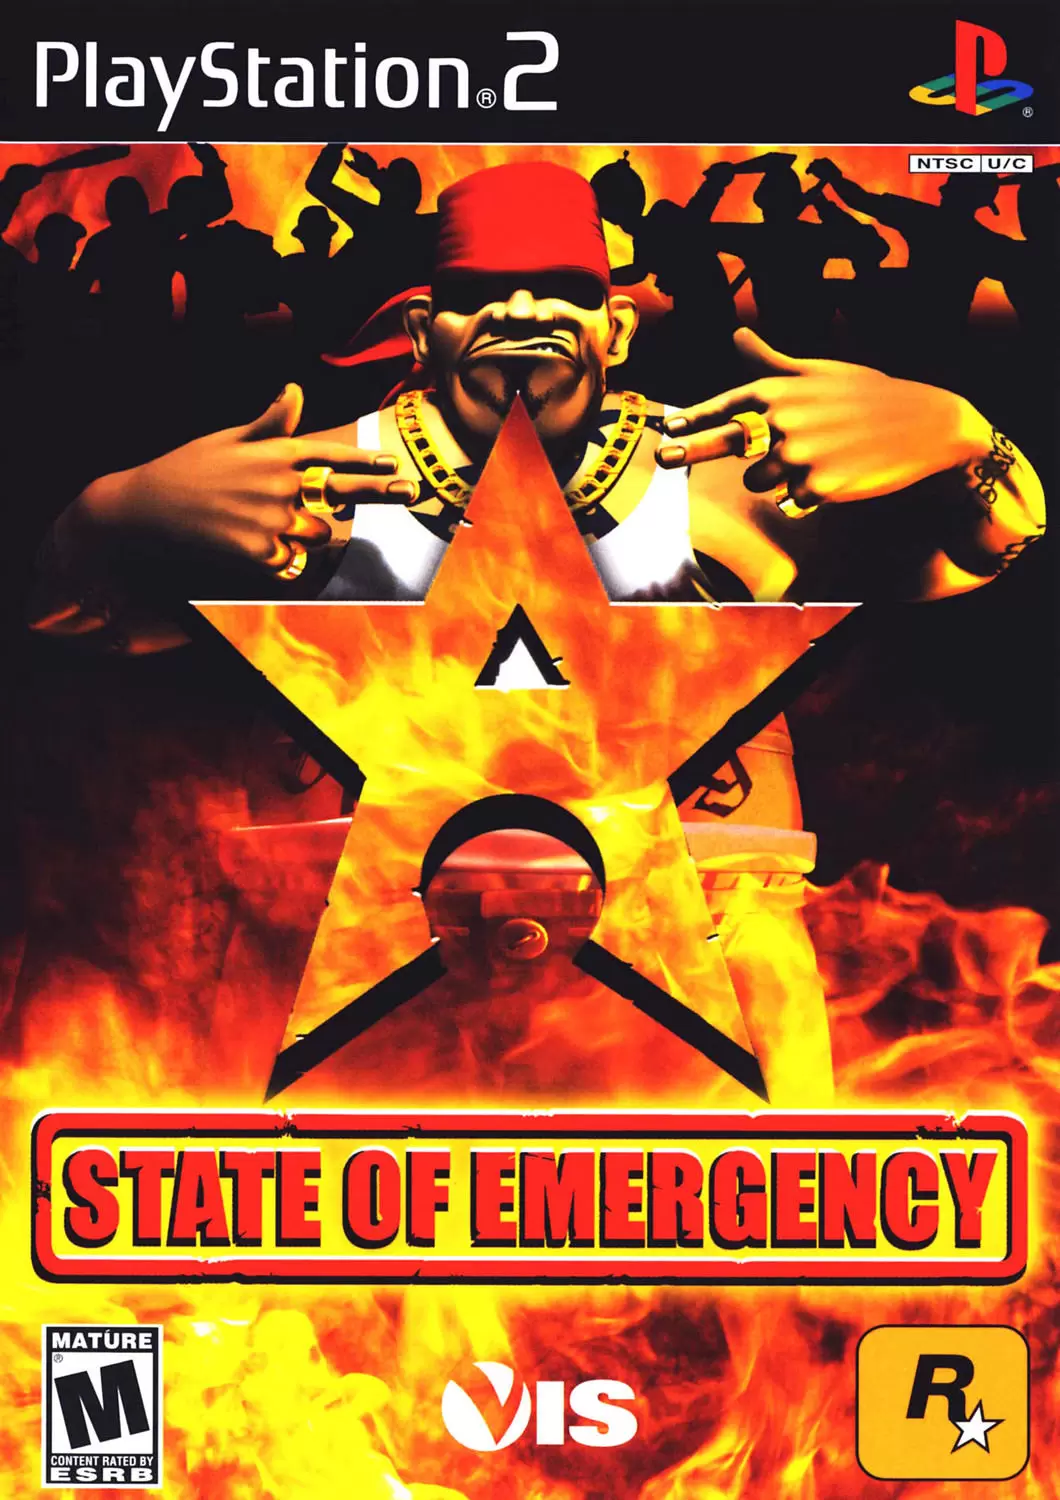 PS2 Games - State Of Emergency